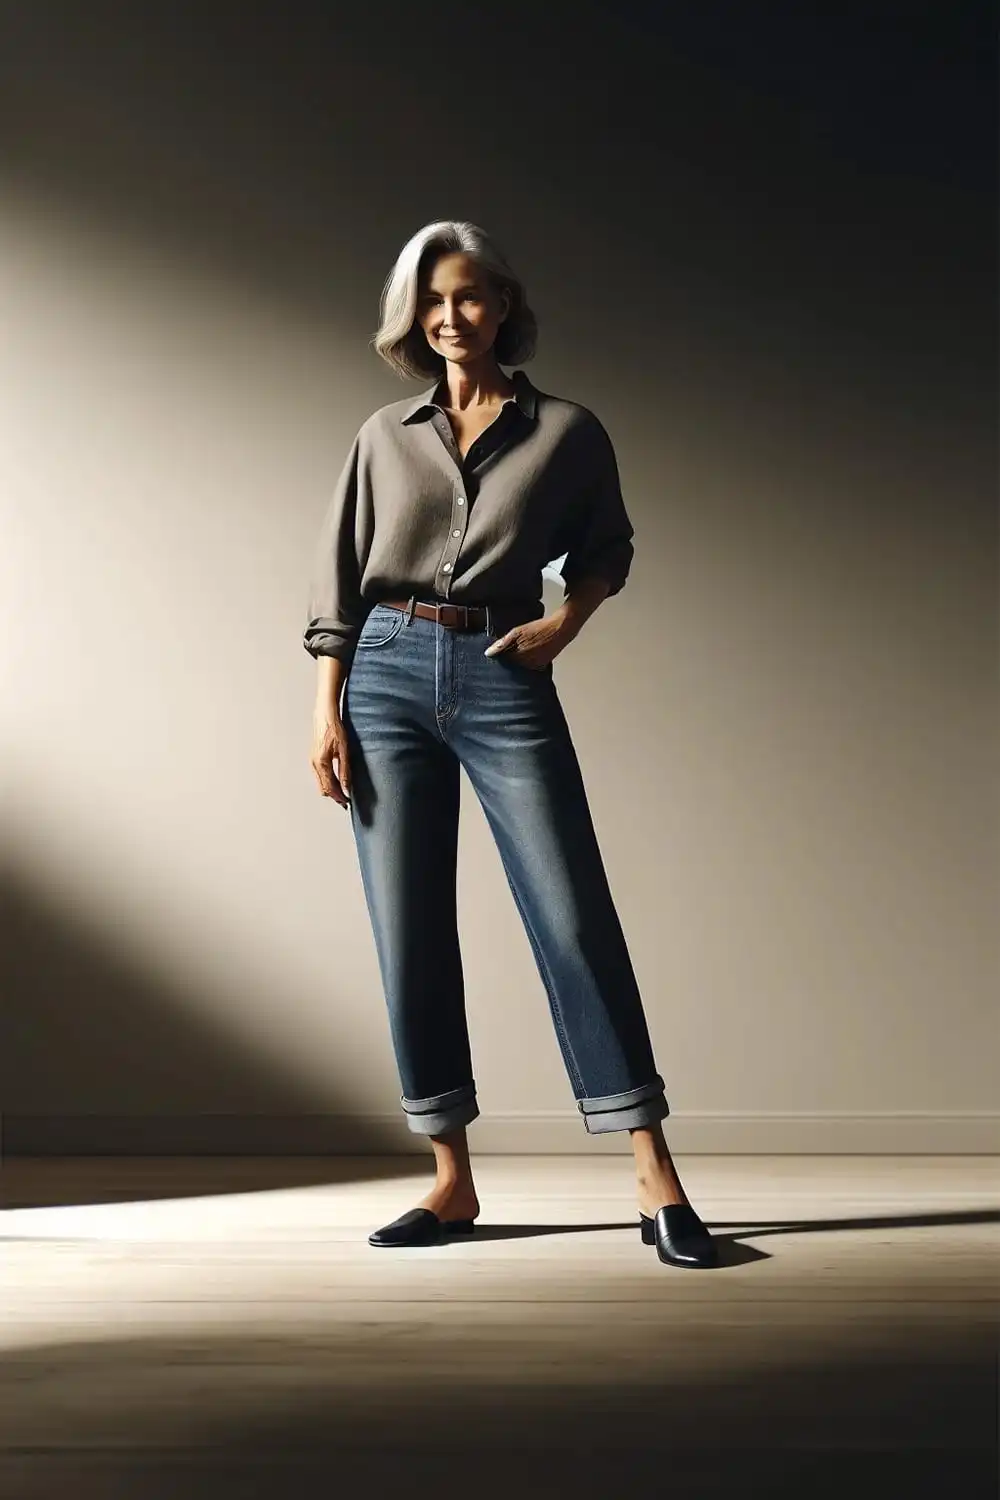 Stylish older woman wearing jeans, blouse and mules.